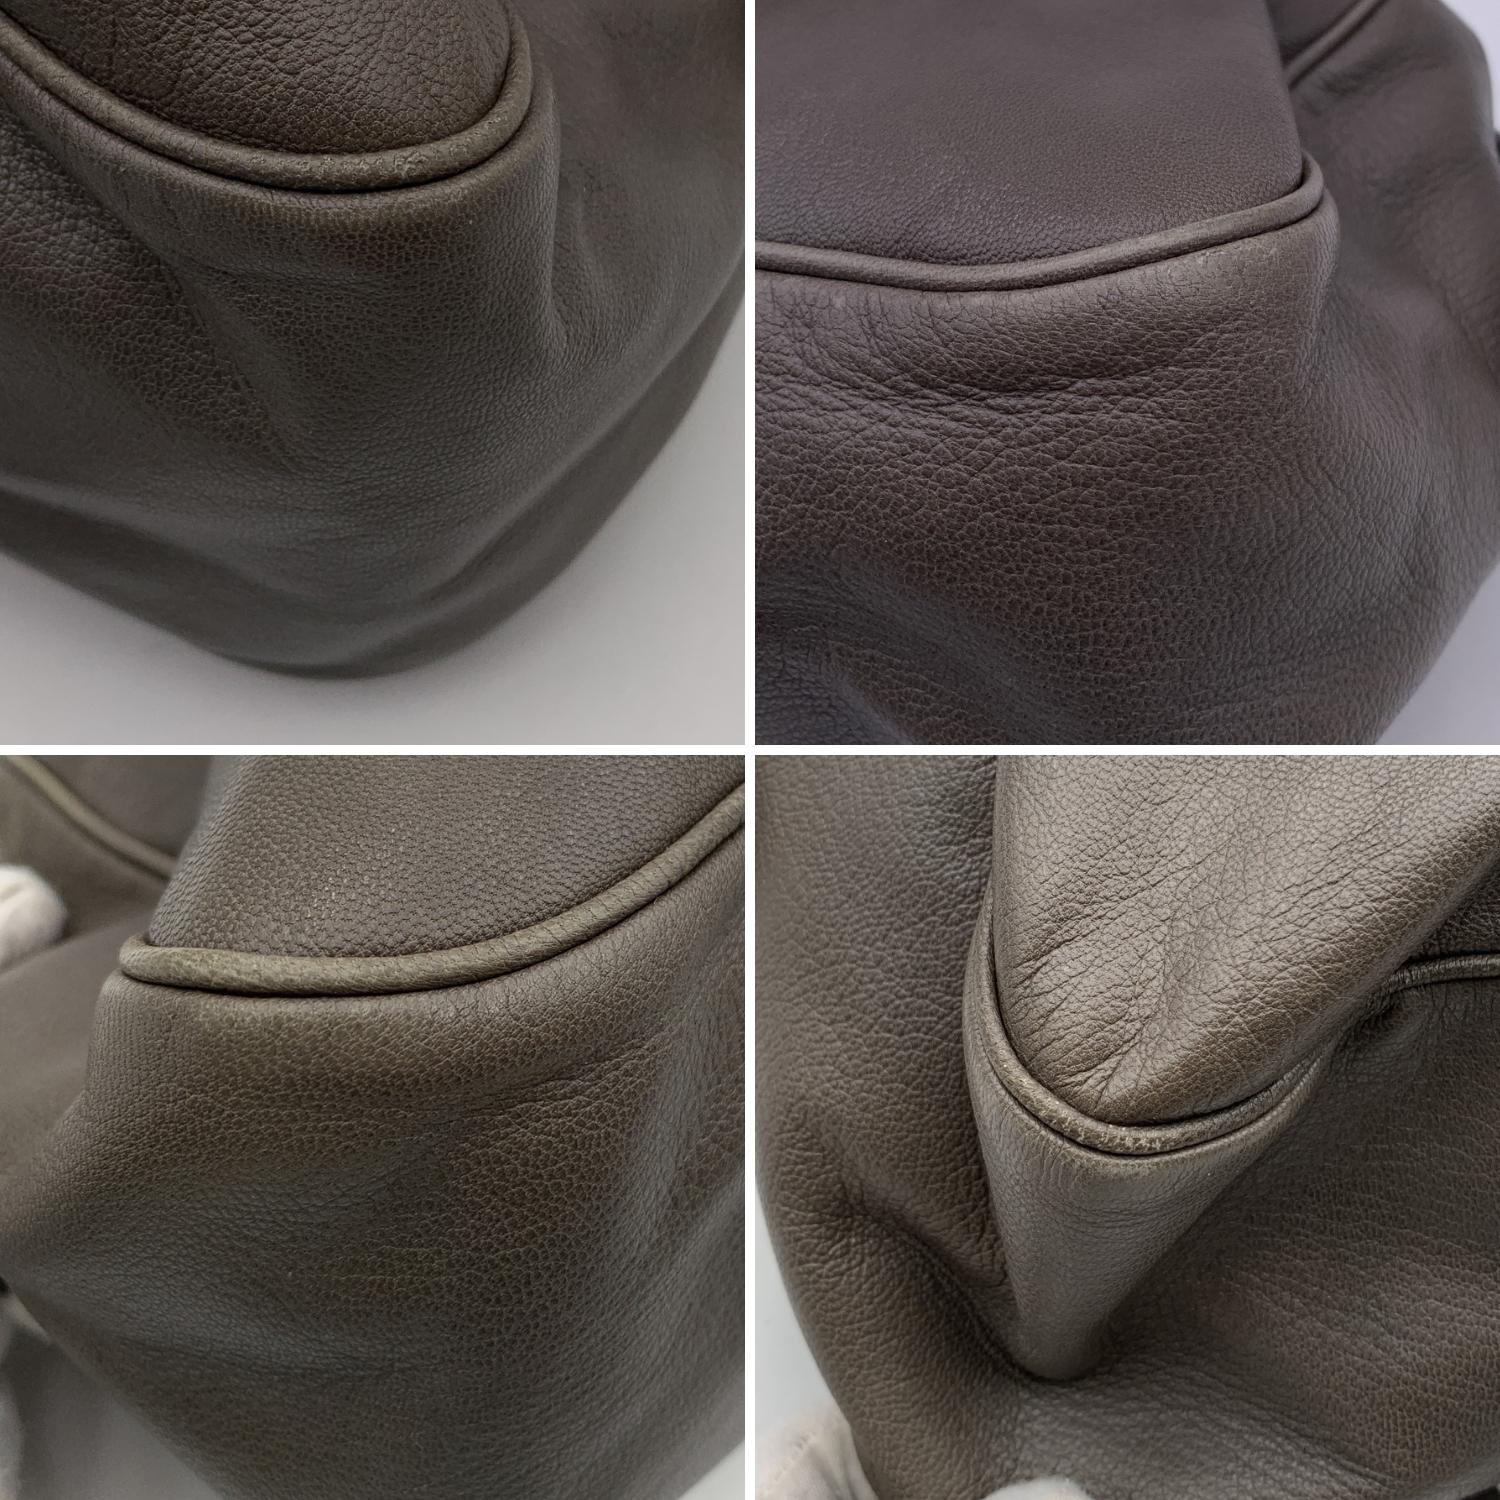 Yves Saint Laurent Grey Taupe Leather Muse Bowler Satchel Bag 2